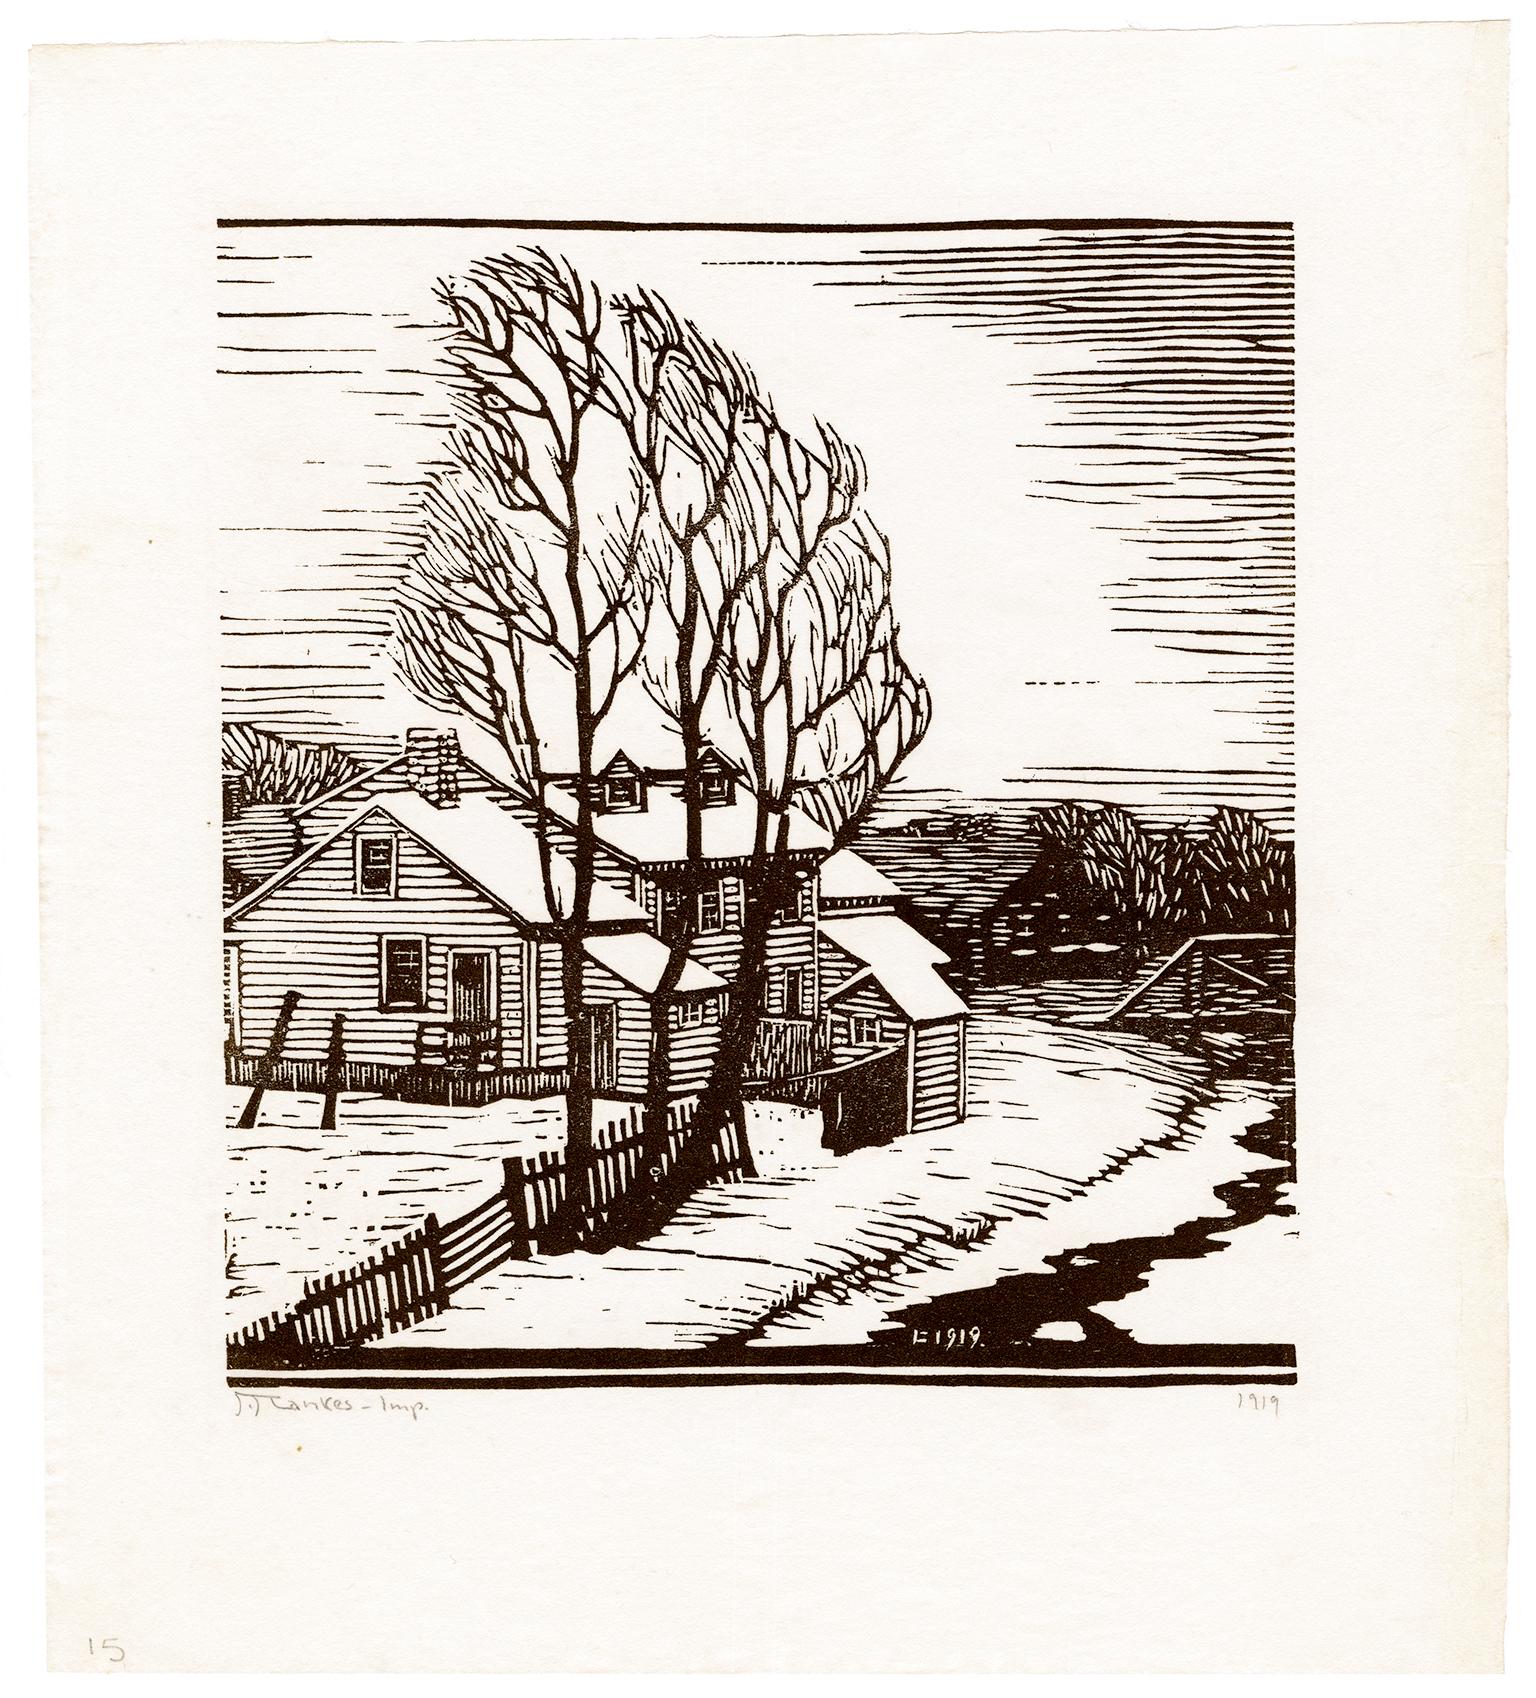 'Cottage in Winter' — Early 20th-Century Arts and Crafts - Print by Julius J. Lankes